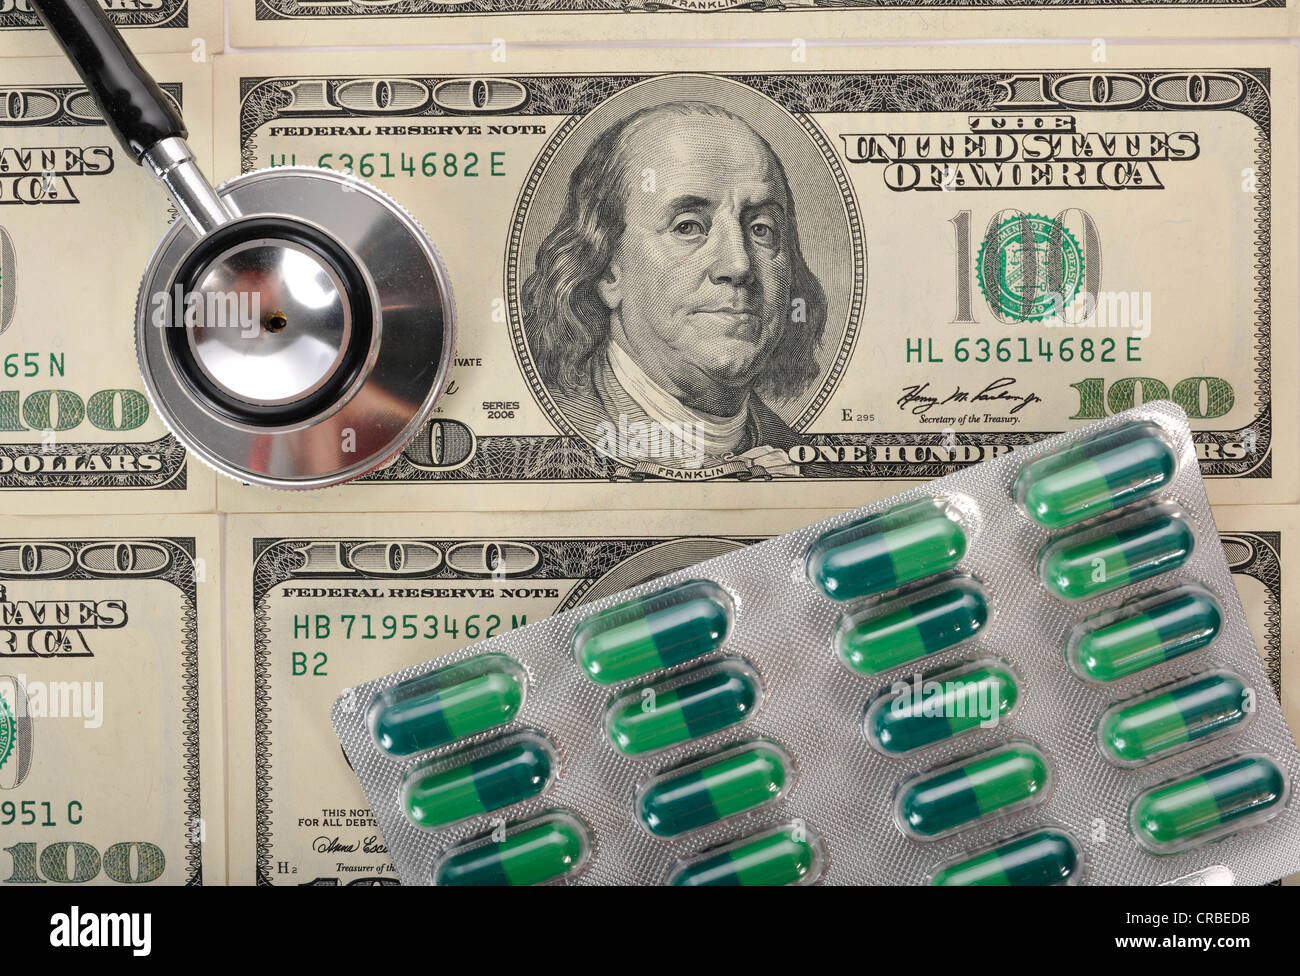 Stethoscope and capsules on U.S. dollar banknotes, symbolic image of a sick U.S. currency or the increasing cost of health care Stock Photo